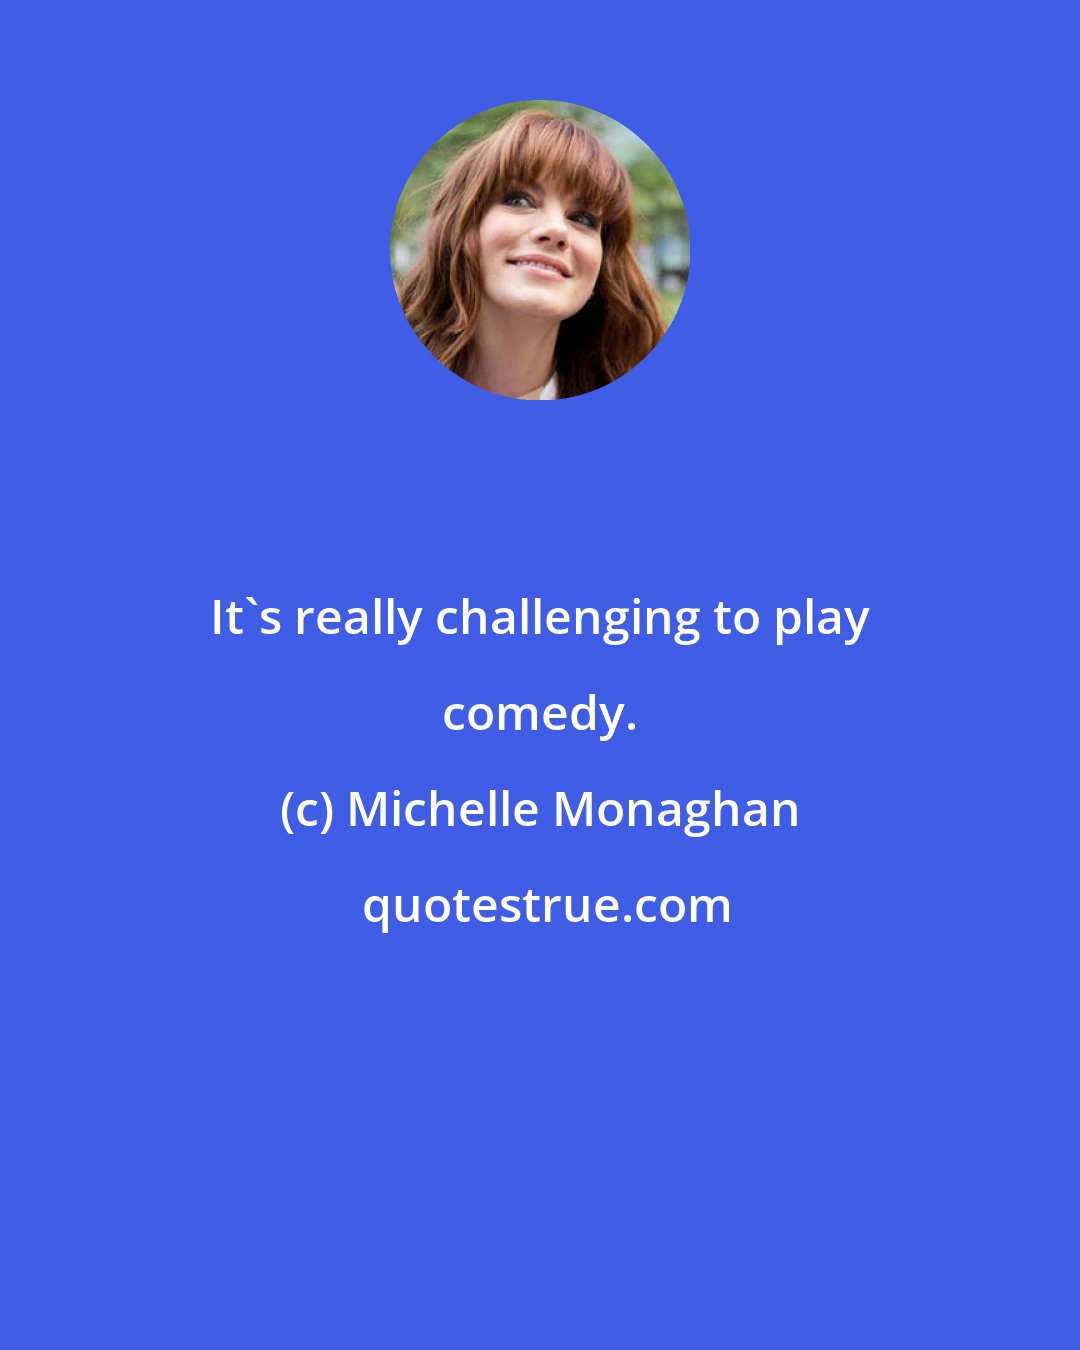 Michelle Monaghan: It's really challenging to play comedy.